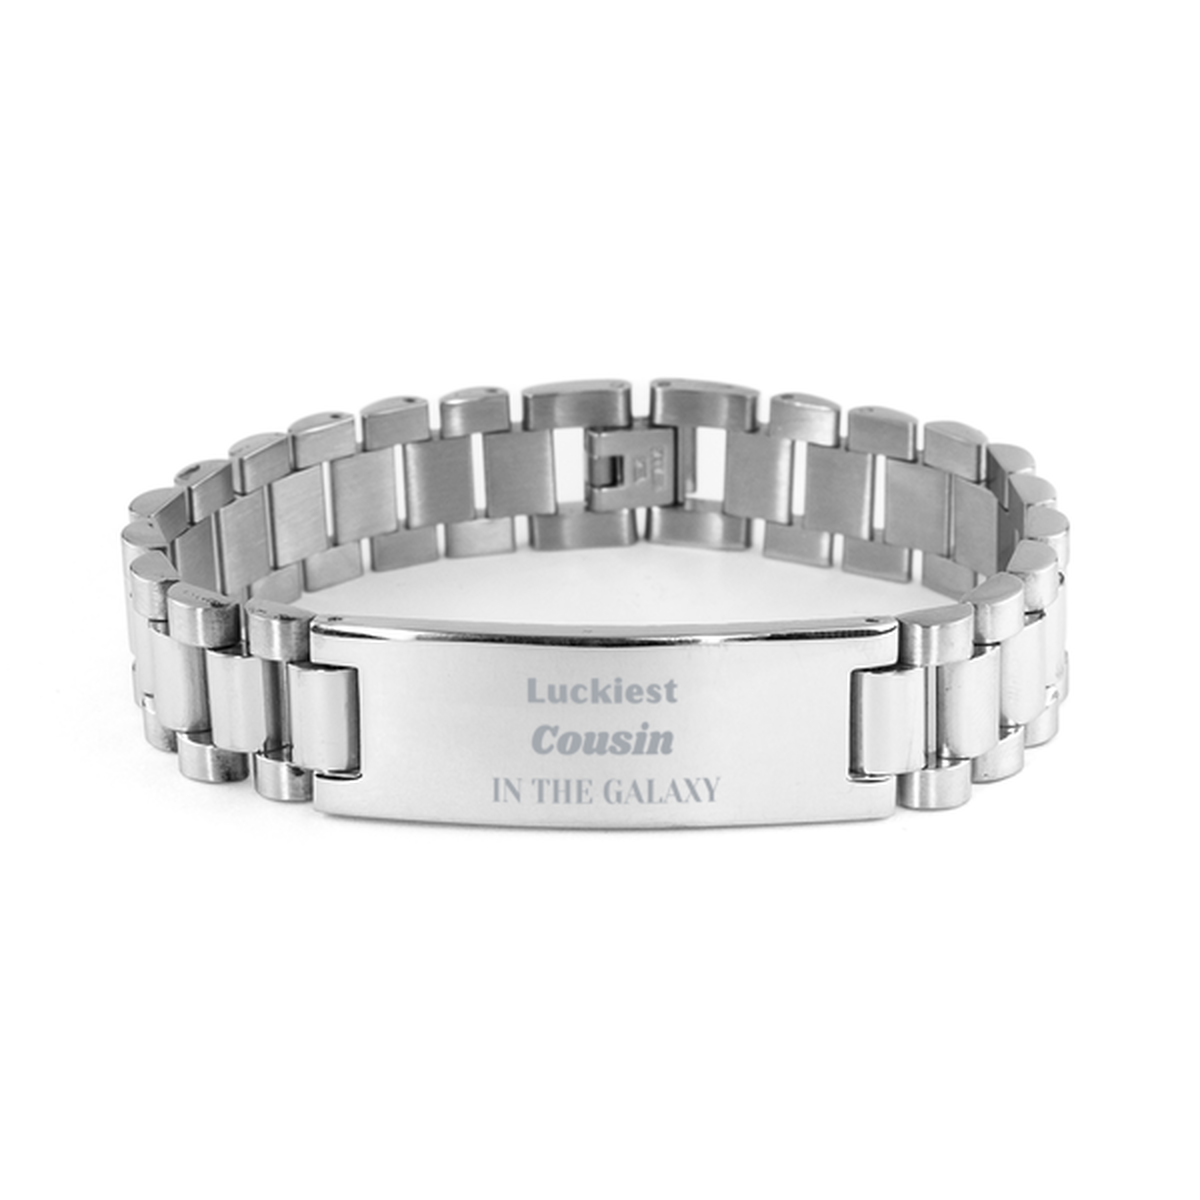 Luckiest Cousin in the Galaxy, To My Cousin Engraved Gifts, Christmas Cousin Ladder Stainless Steel Bracelet Gifts, X-mas Birthday Unique Gifts For Cousin Men Women